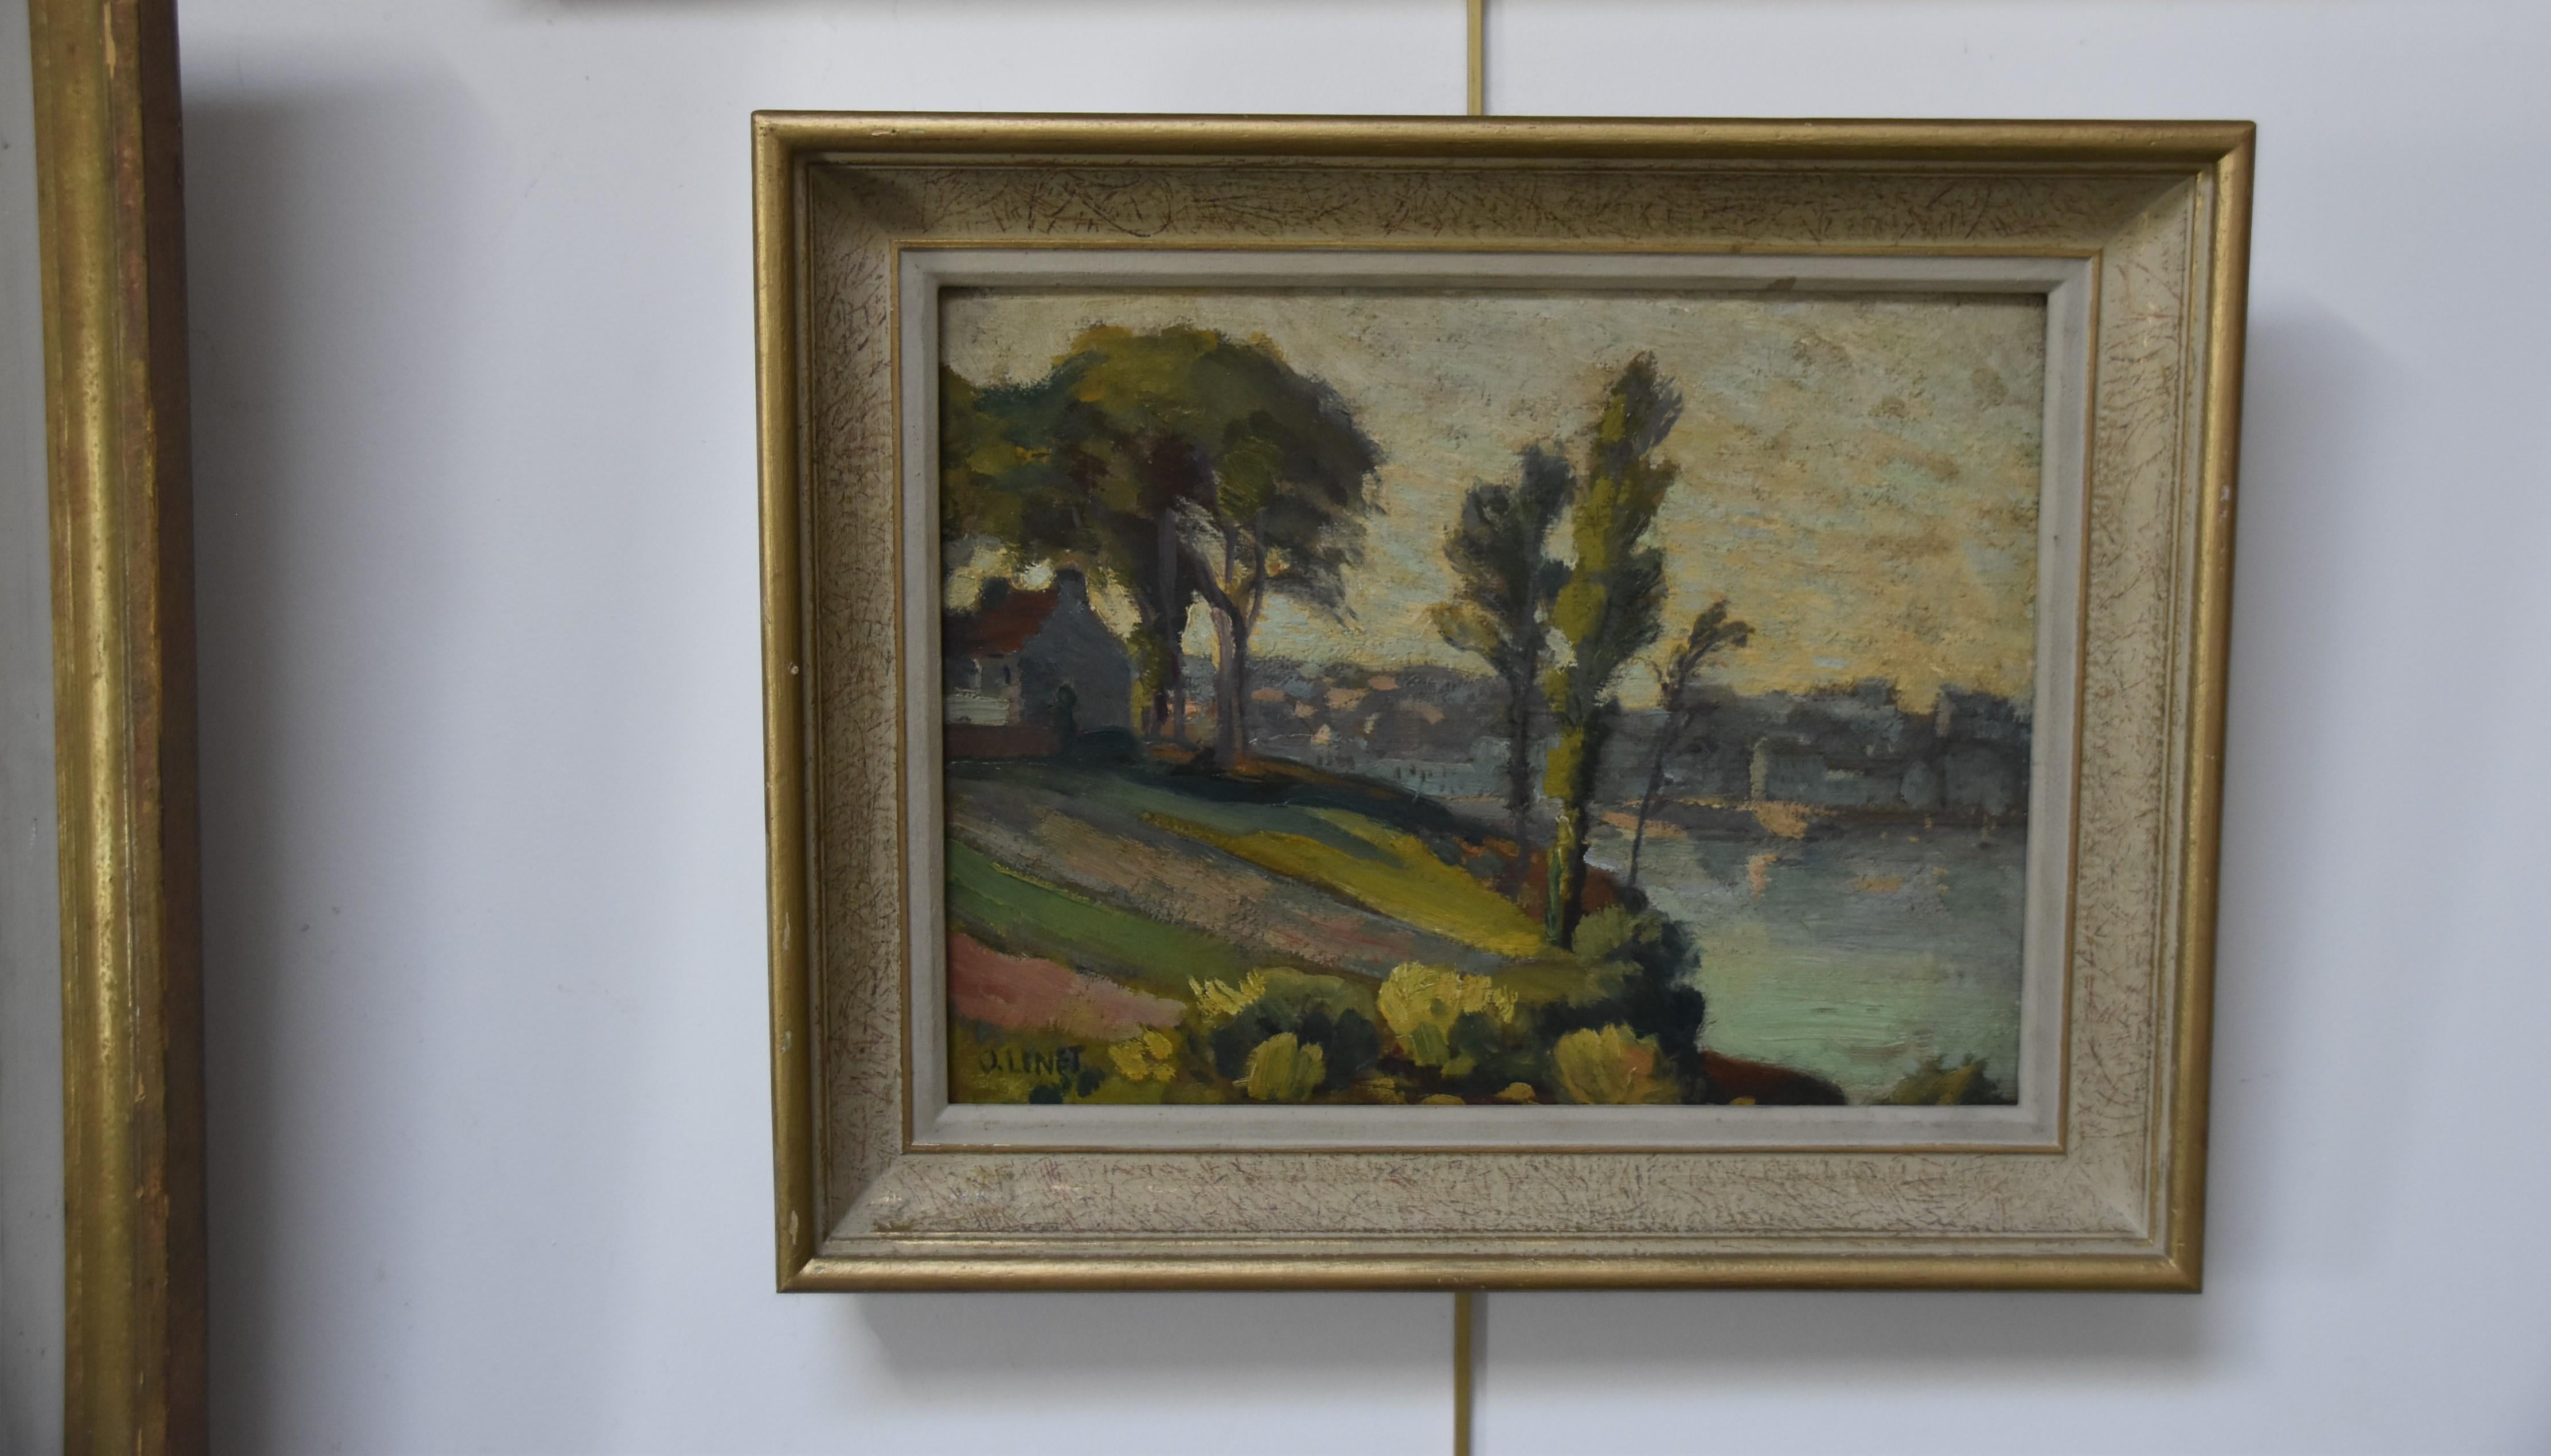 Octave Linet (1870-1962) 
Landscape by the river,
signed lower left
oil on board 
on the back a pencil study of the Virgin and Child
25 x 33 cm
In good condition 
In a vintage frame  : 33,5 x 41 cm

We know that Octave Linet was a great collector of